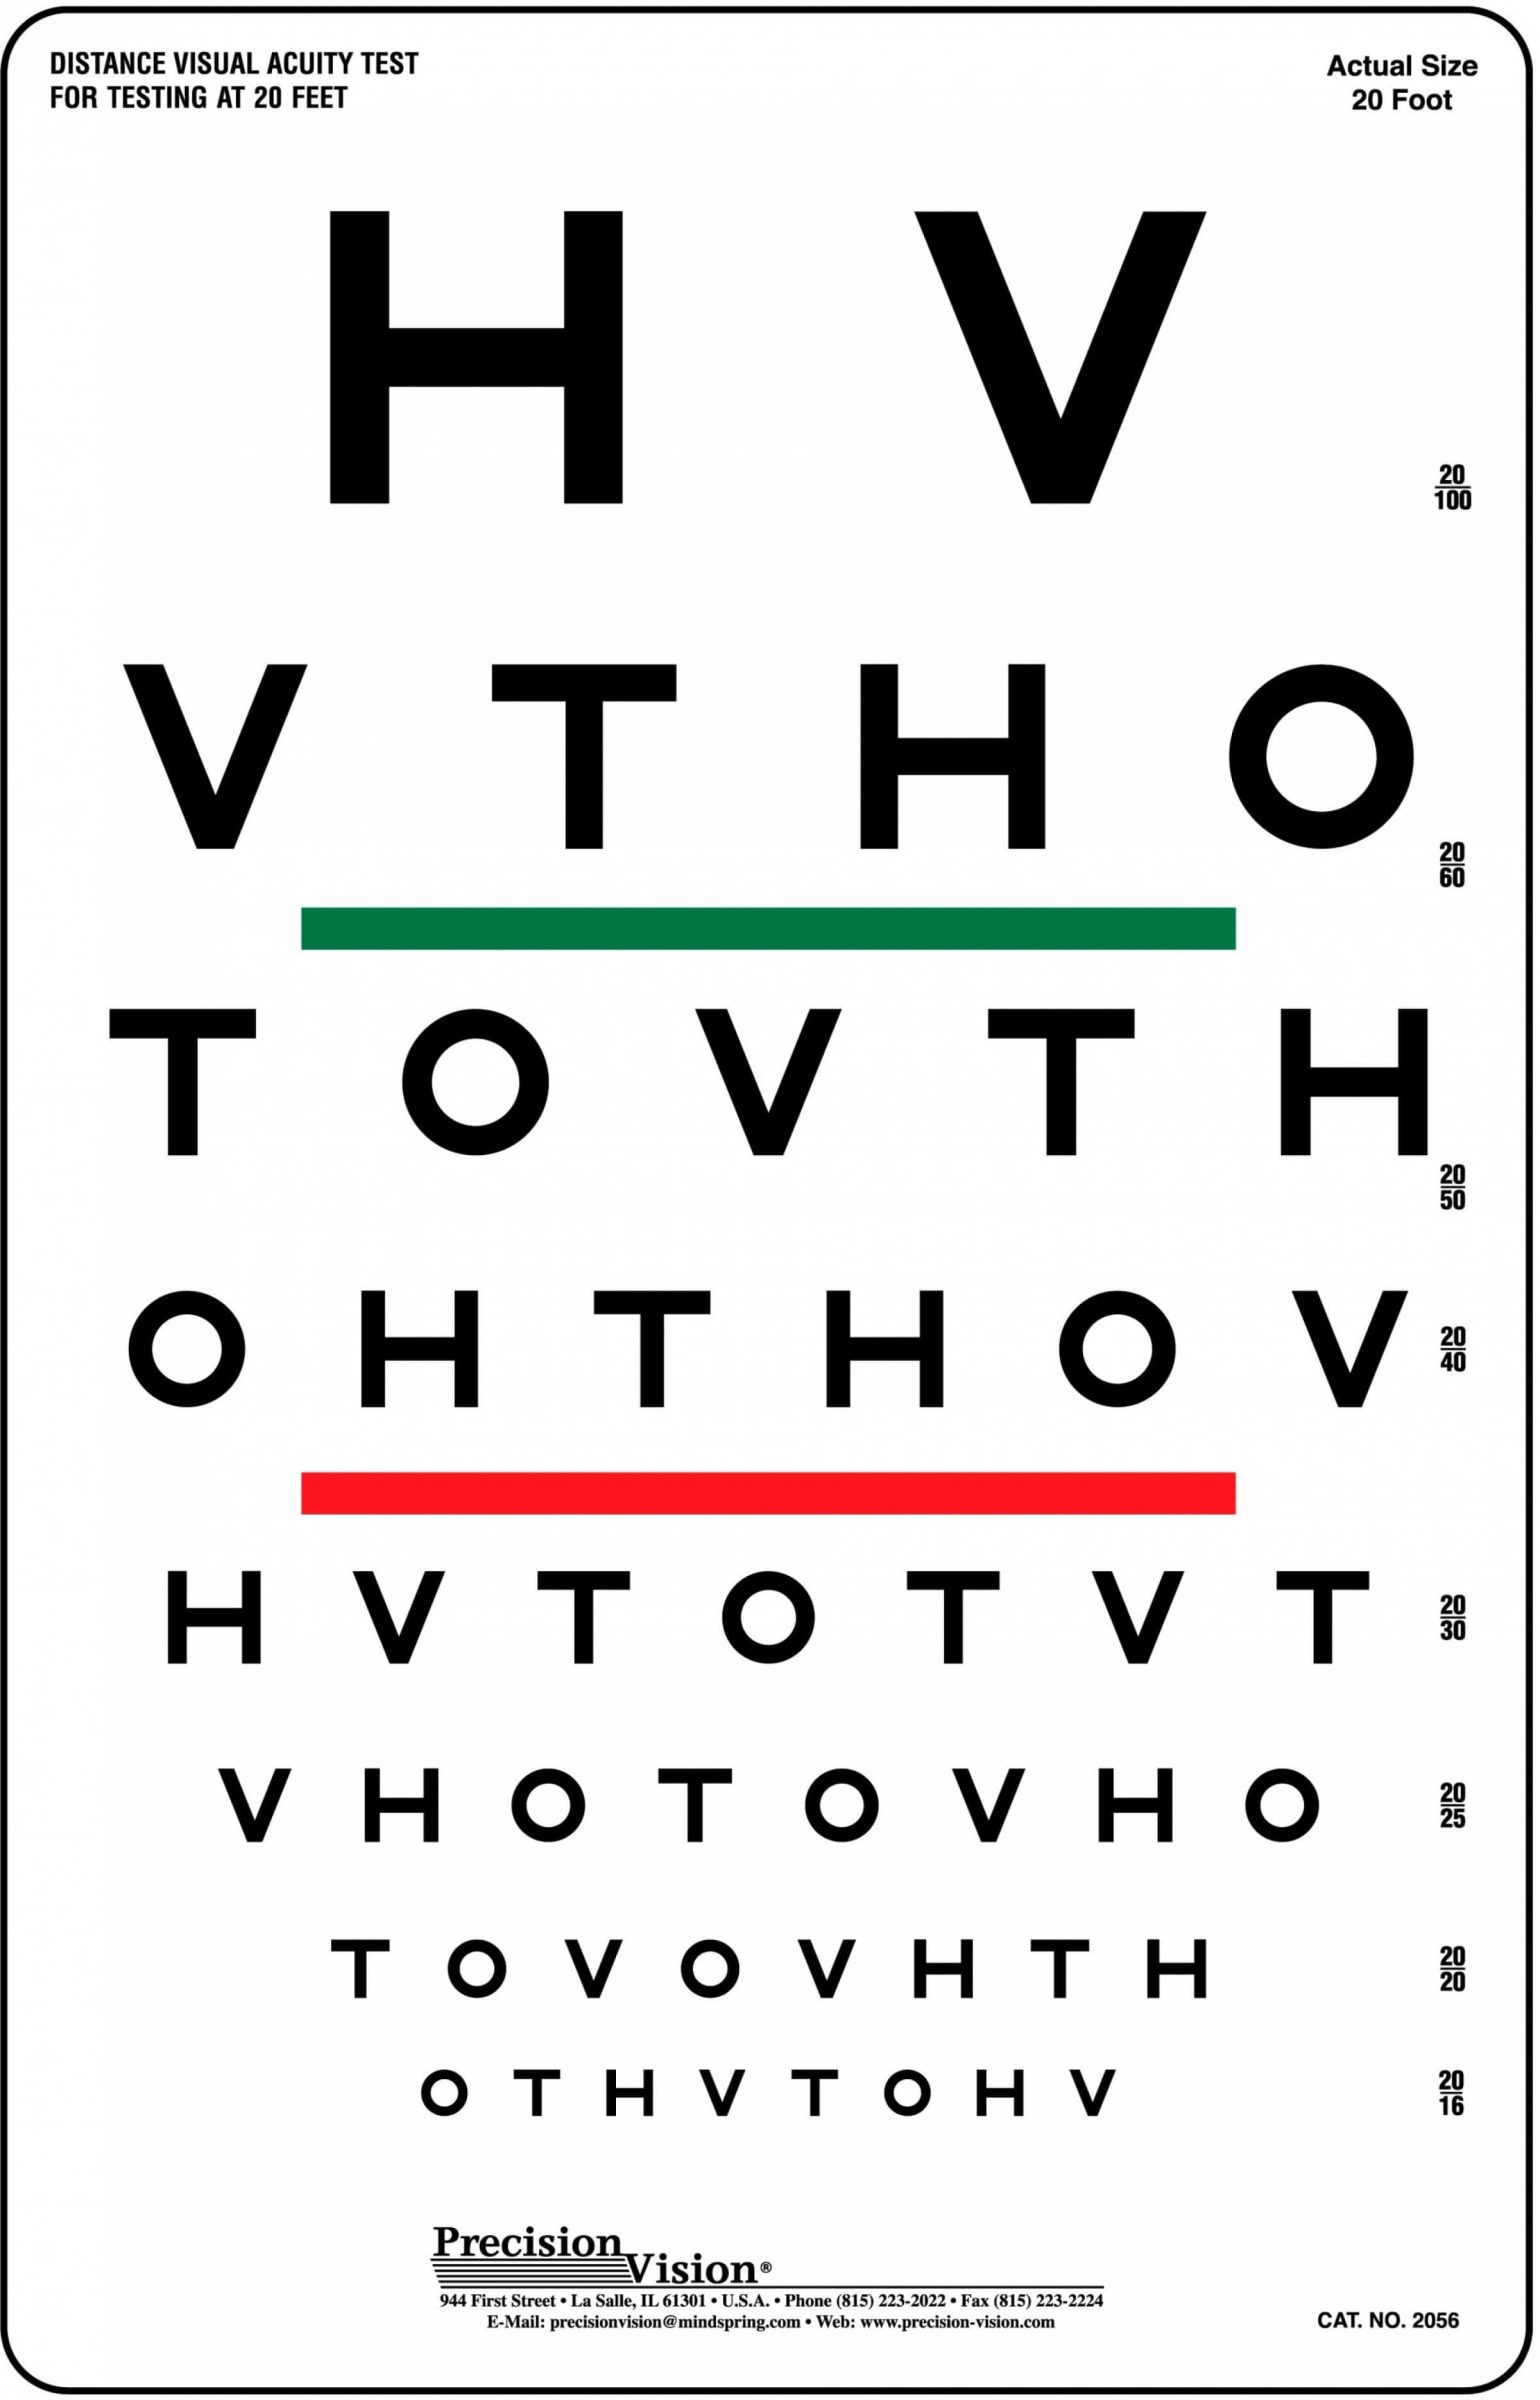 hotv-visual-acuity-color-vision-chart-precision-vision